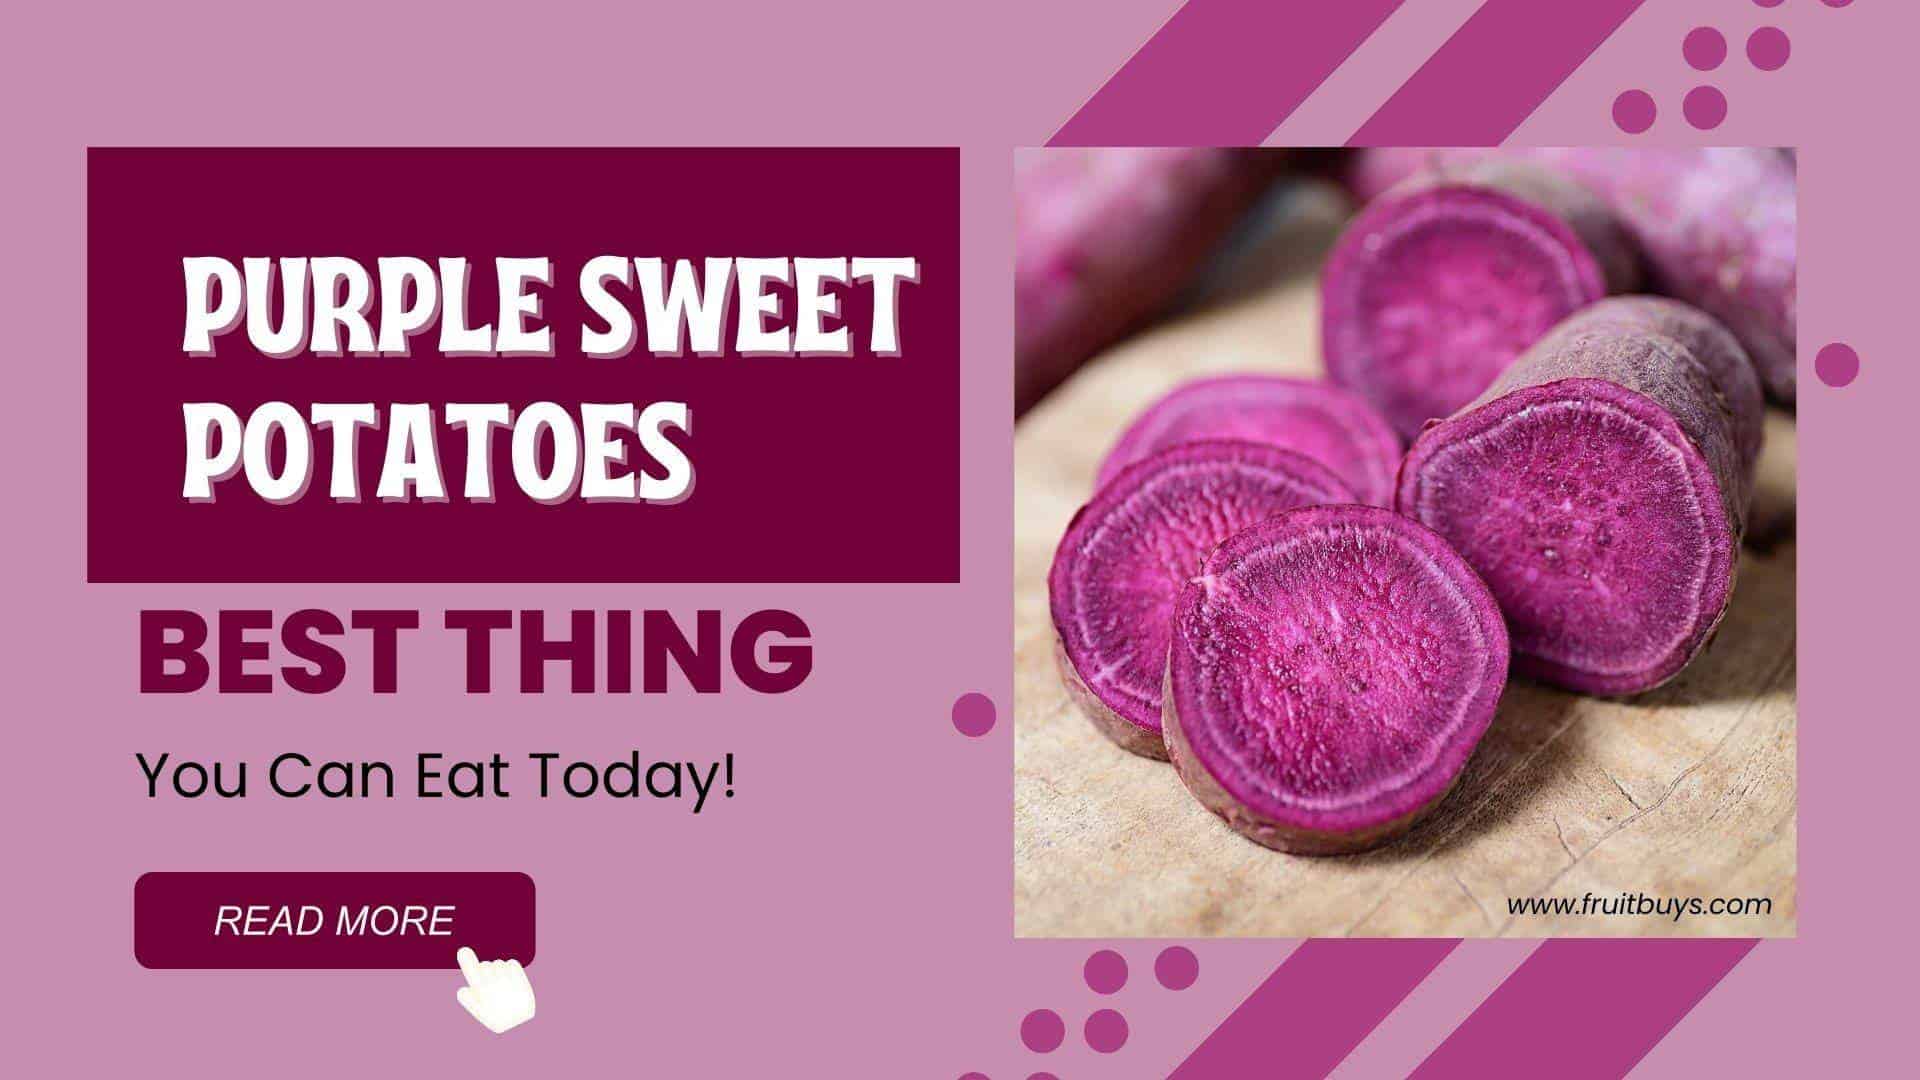 FruitBuys Vietnam  7 Reasons Why Purple Sweet Potatoes Are The Best Thing You Can Eat Today